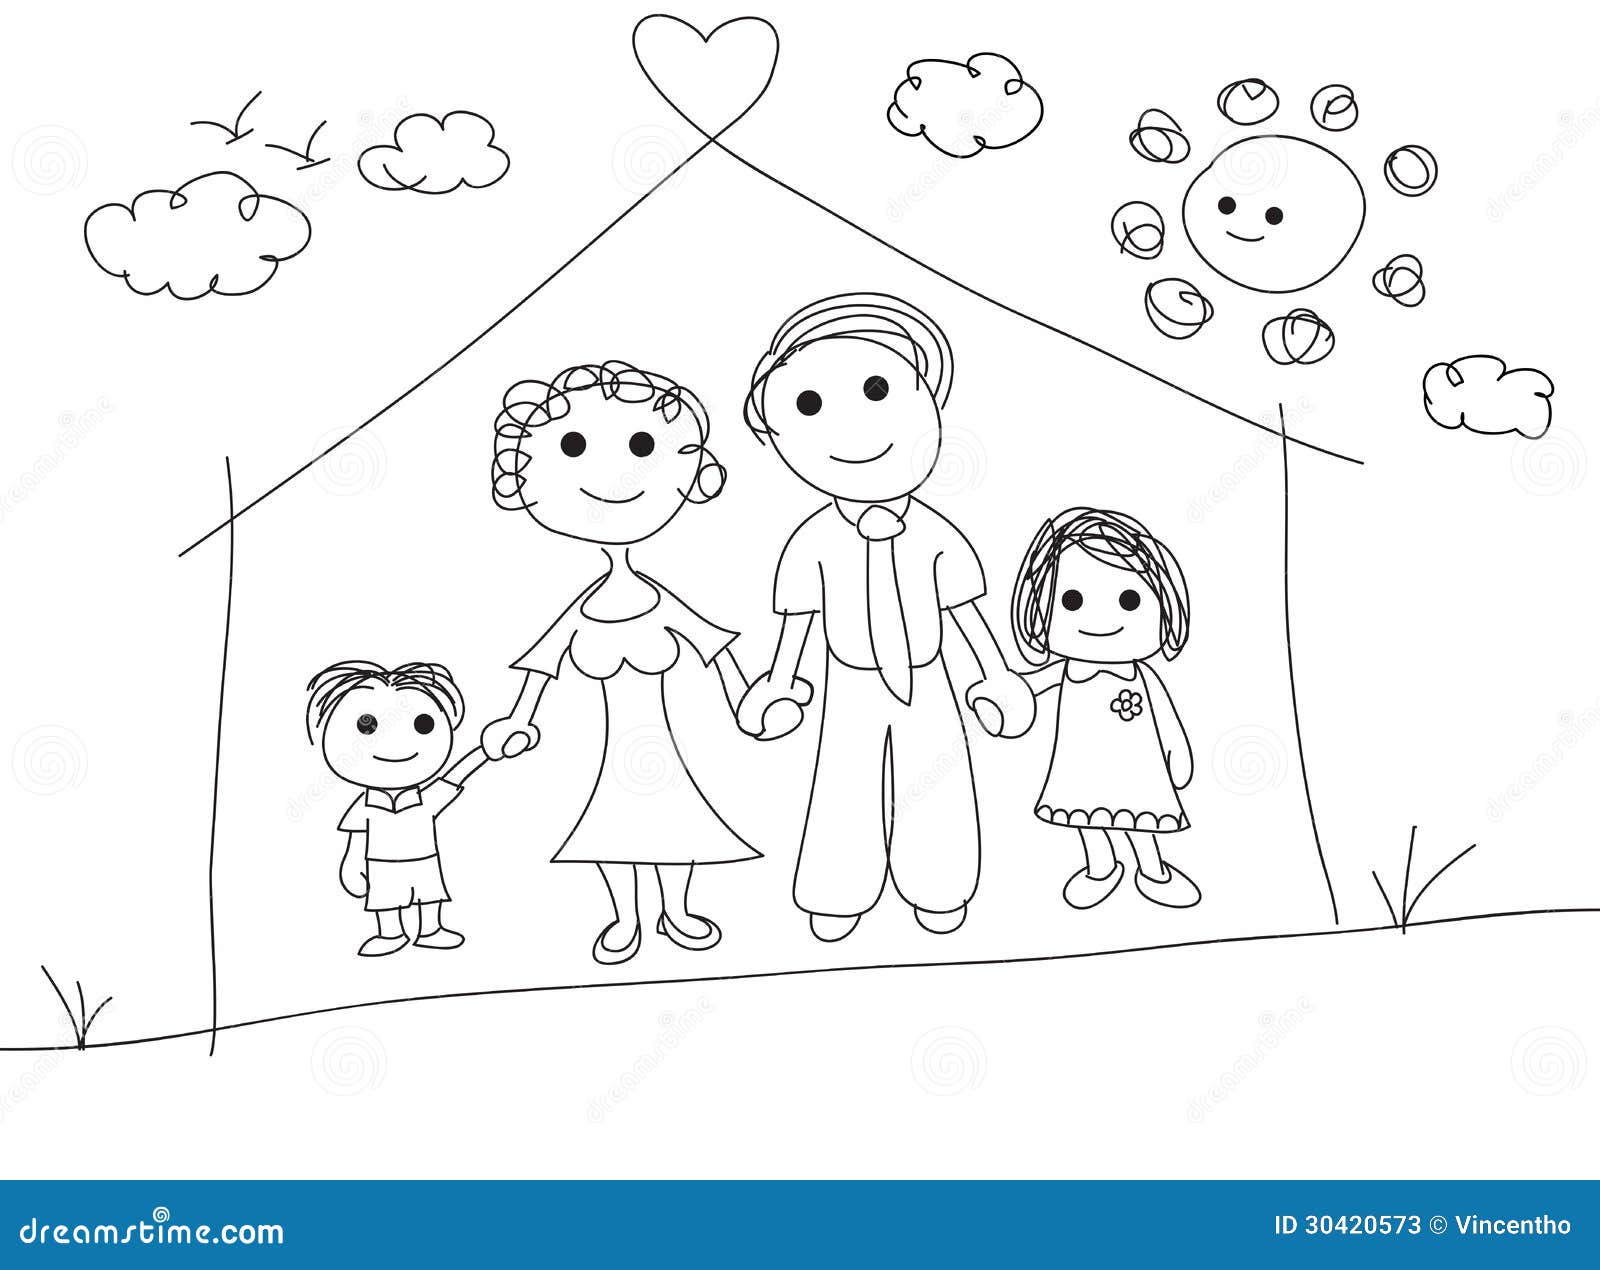 FAMILYDAY HOW TO DRAW A FAMILY STEP BY STEP | INTERNATIONAL FAMILY DAY PENCIL  SKETCH | CLOUDY DIVI - YouTube